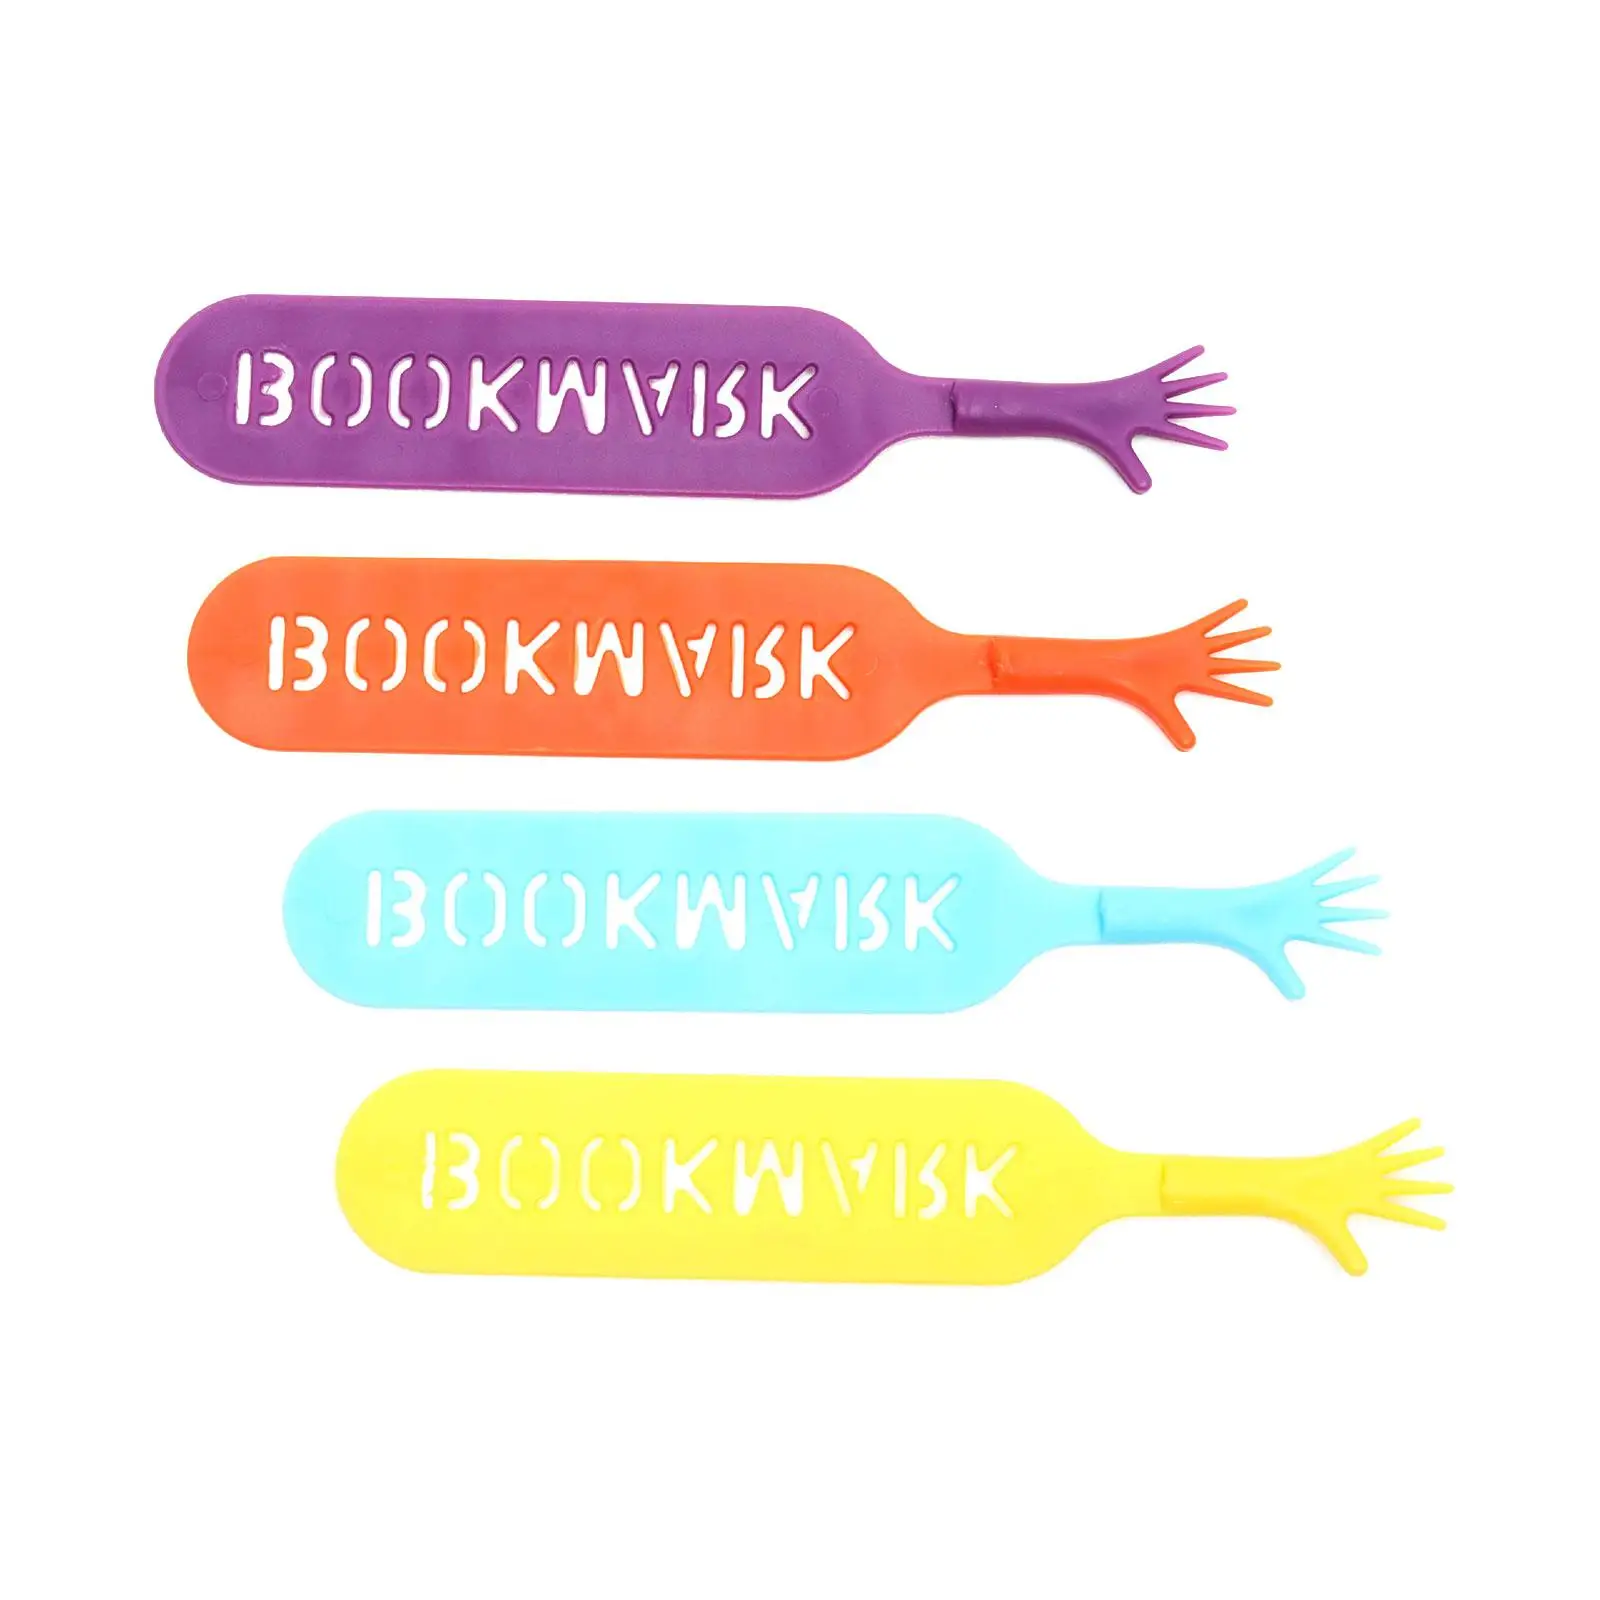 4 Pieces Novelty Bookmark Book Buckle Memo Stationery Book Mark Decorations Book Marker Gift for Adults Kids Birthday Gifts